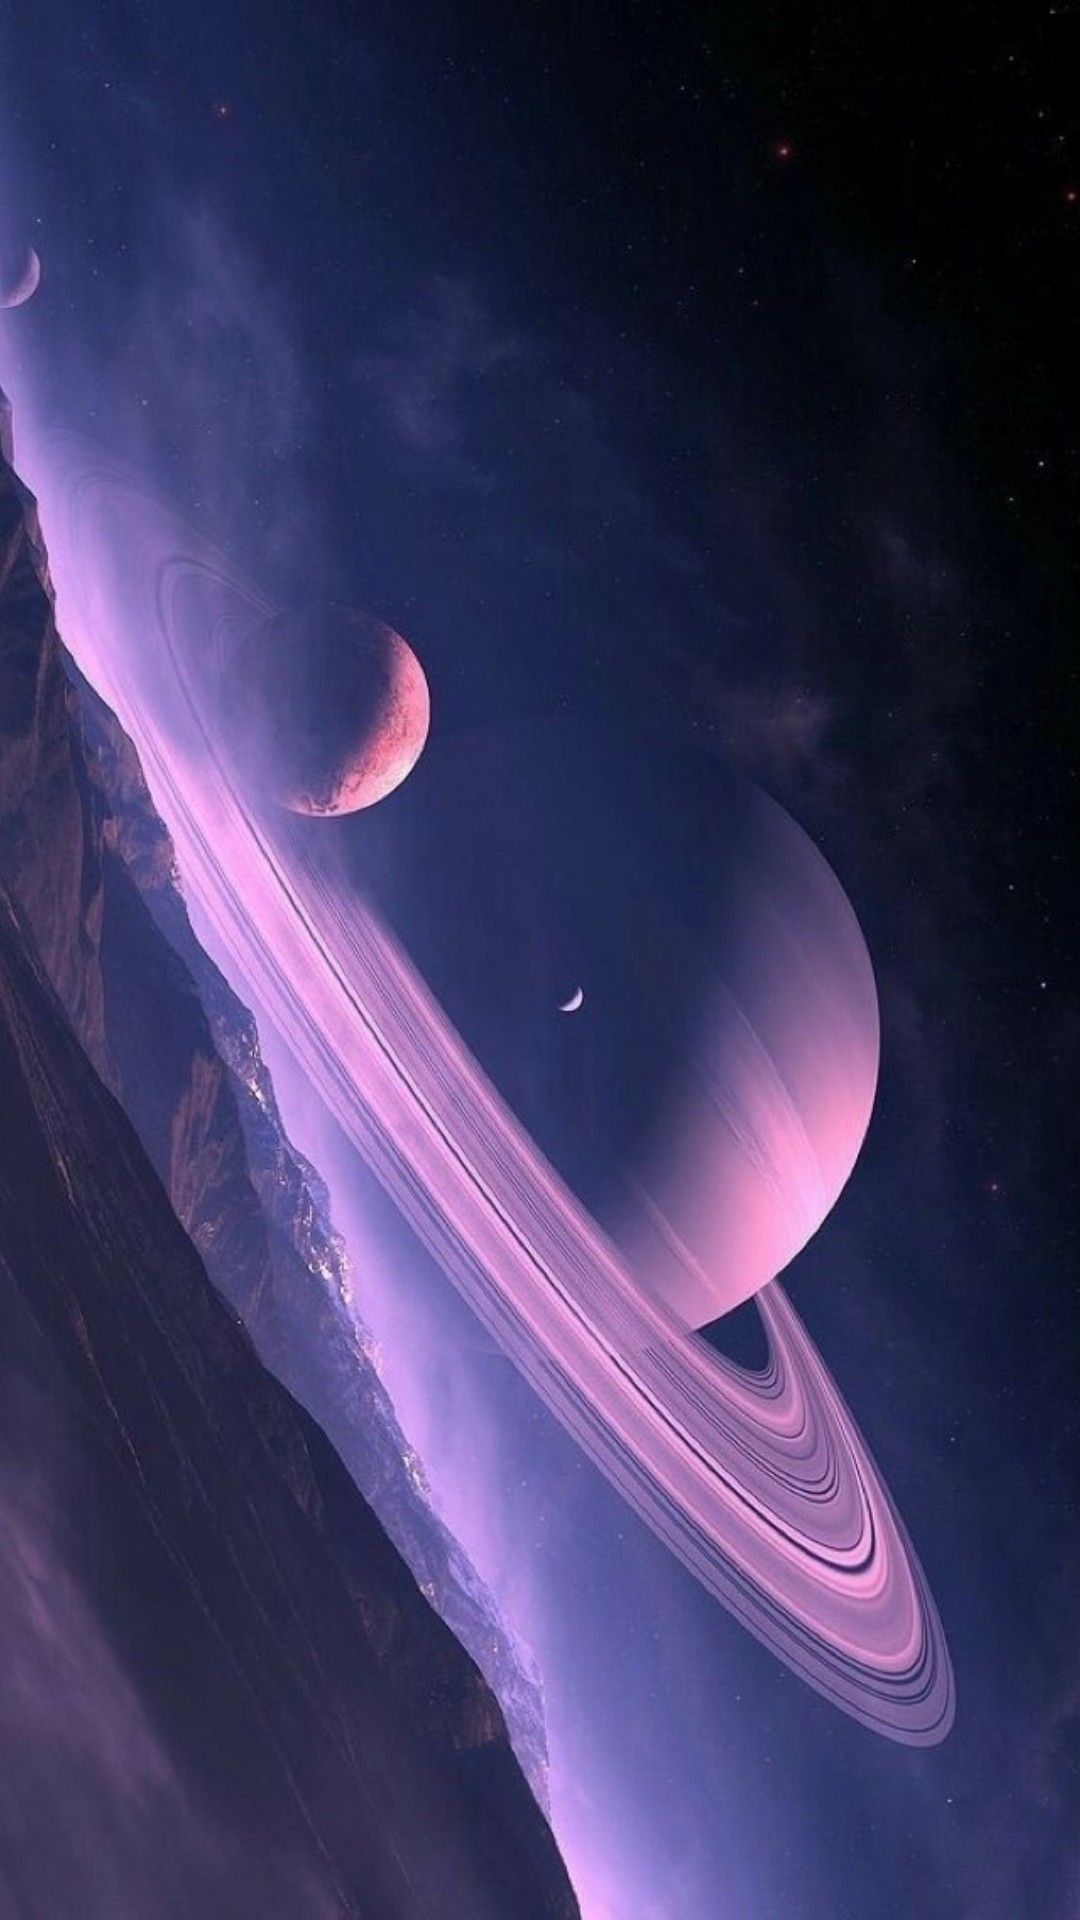 IPhone wallpaper of a planet with a purple ring around it - Planet, galaxy